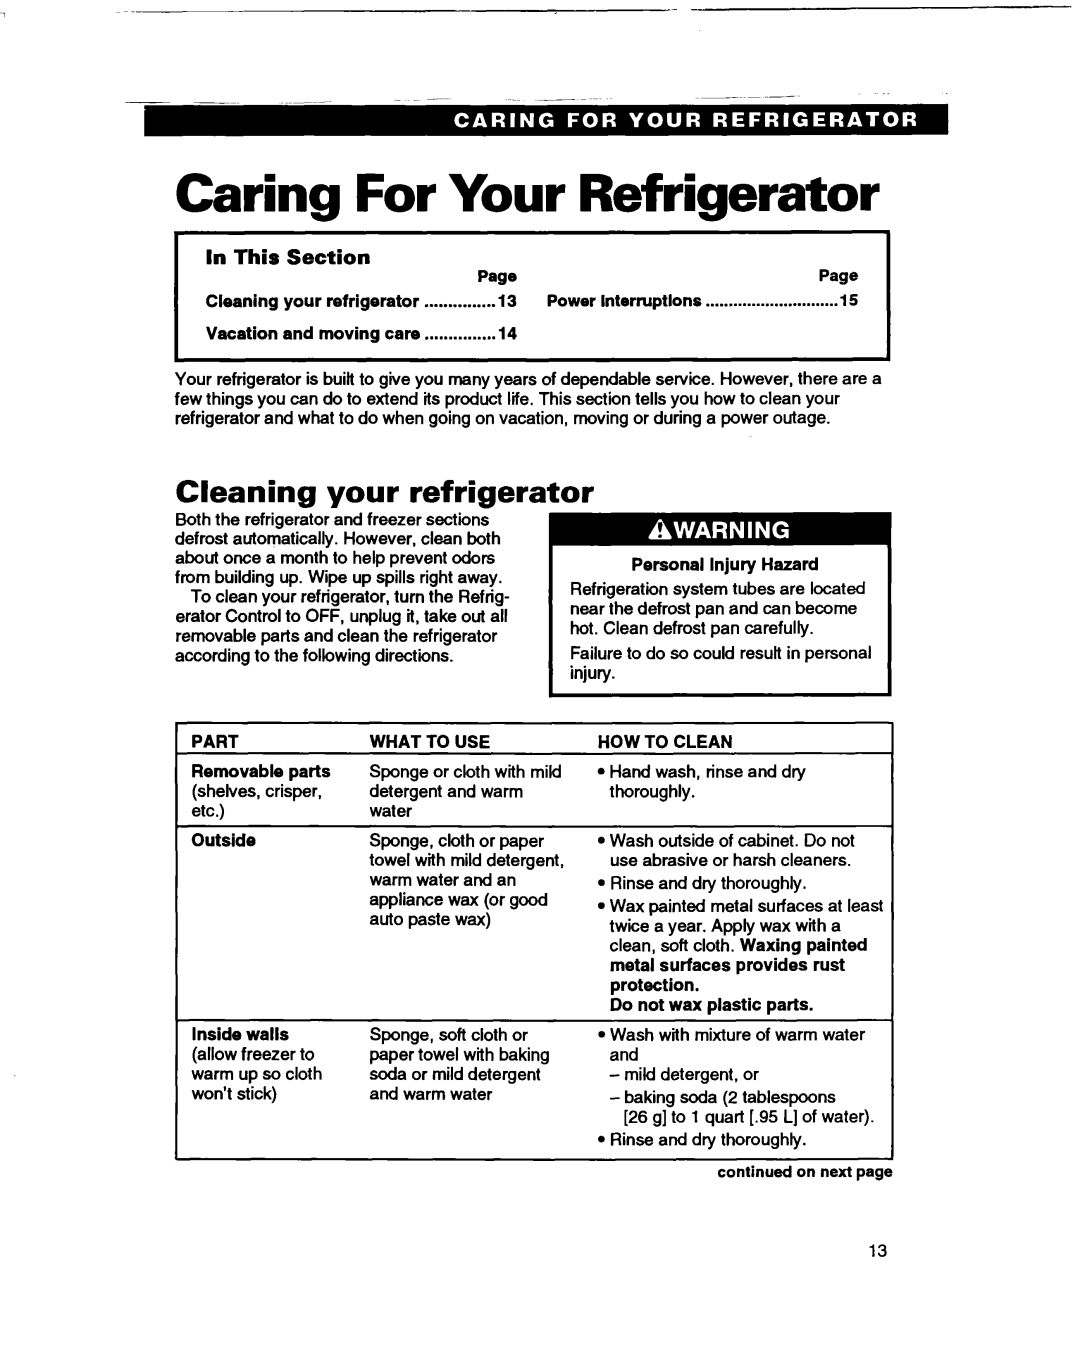 Whirlpool ETl4HJ, ET14GK warranty Caring For Your Refrigerator, Cleaning your refrigerator, In This, Section 